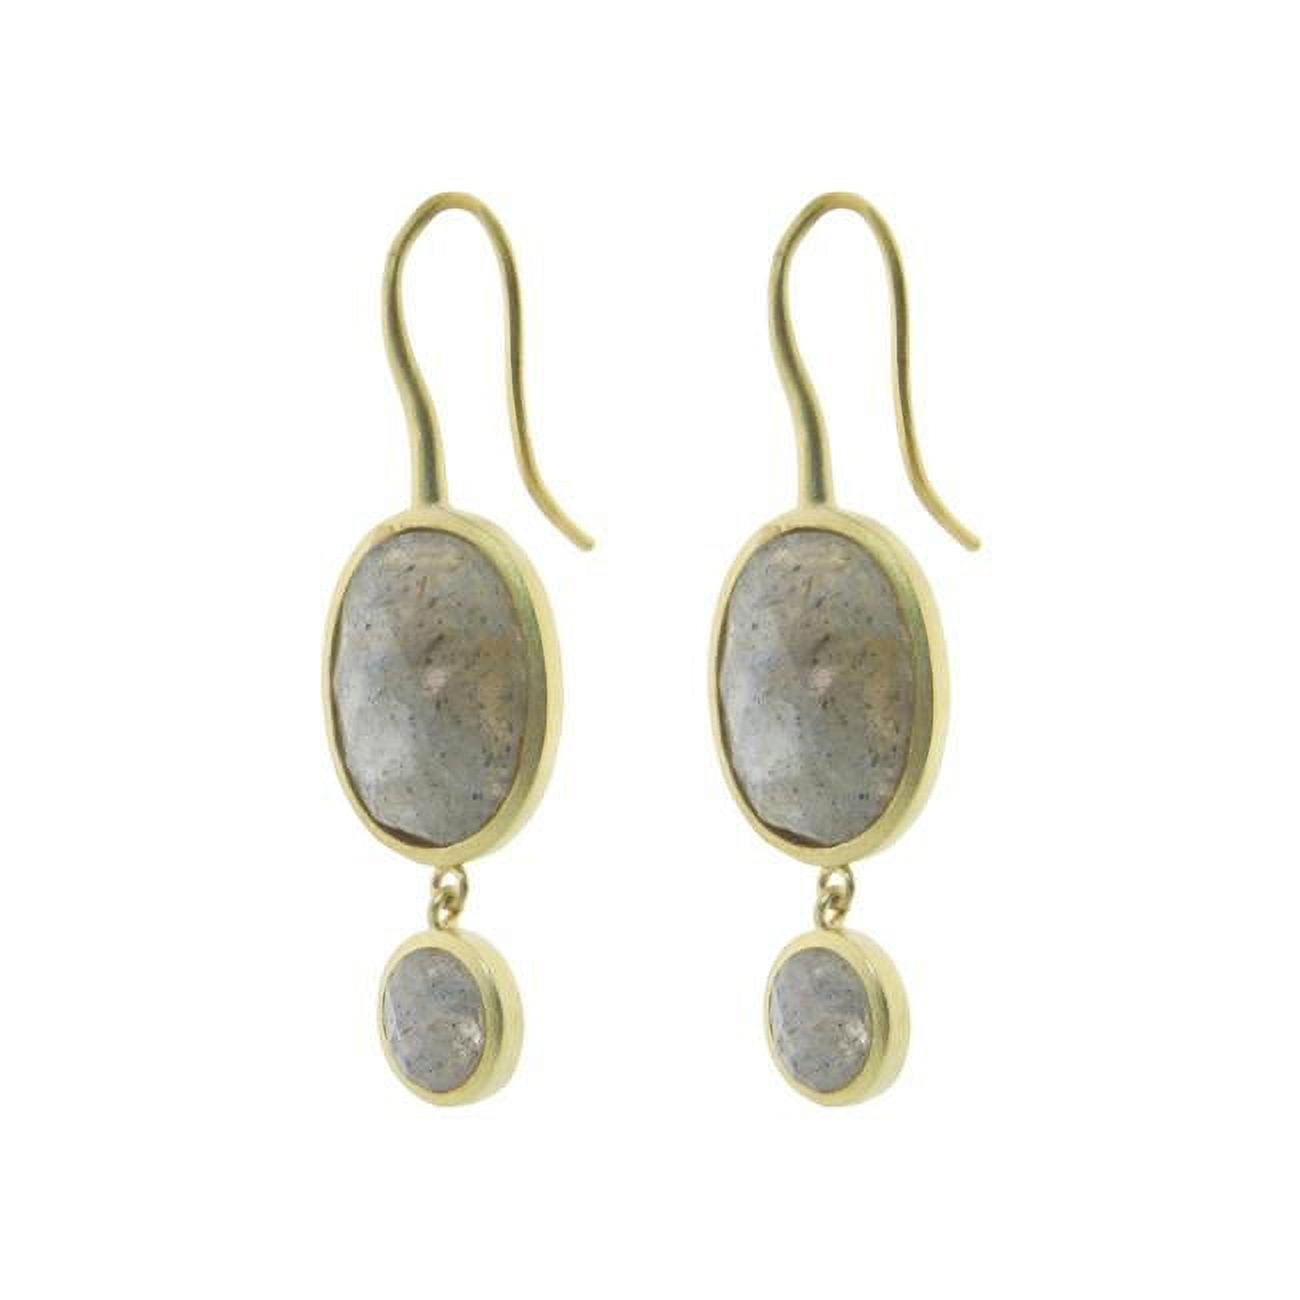 Picture of Fronay 215280 Labradorite Stone Drop Earrings in Gold Plated Silver